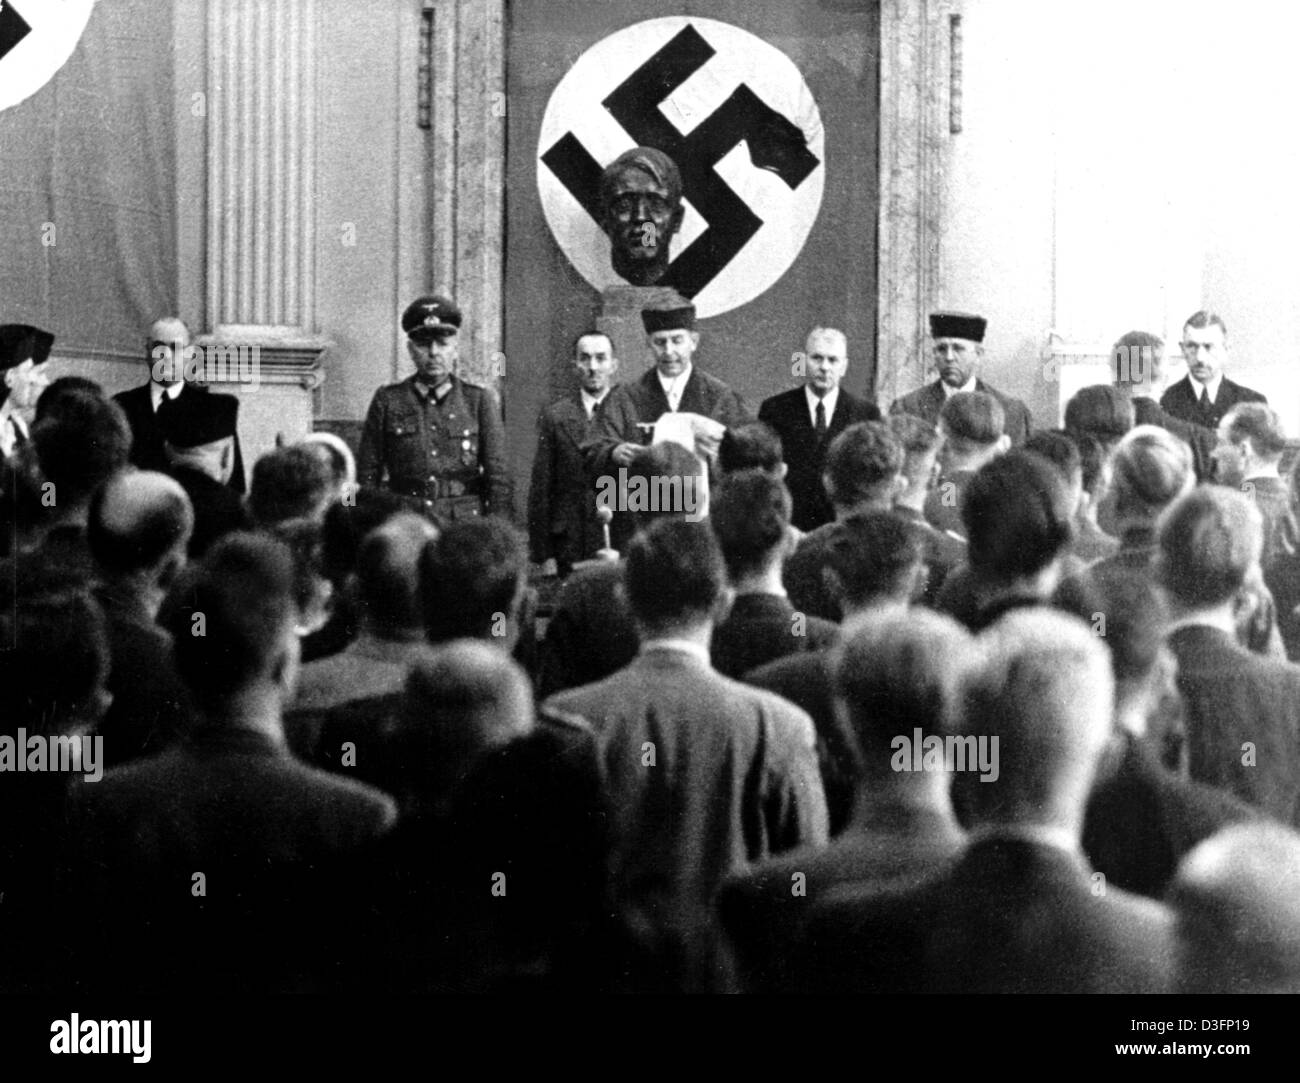 (dpa files) - Roland Freisler (C), the President of the 'National Socialist People's Court' (Volksgerichtshof, VGH), reads out the verdict against the eight suspects of the assassination attempt on Hitler of 20 July 1944, the so-called July Plot, at the court in Berlin, 8 August 1944. In the background behind Freisler a bust of Adolf Hitler can be seen, and a swastica with a hidden Stock Photo